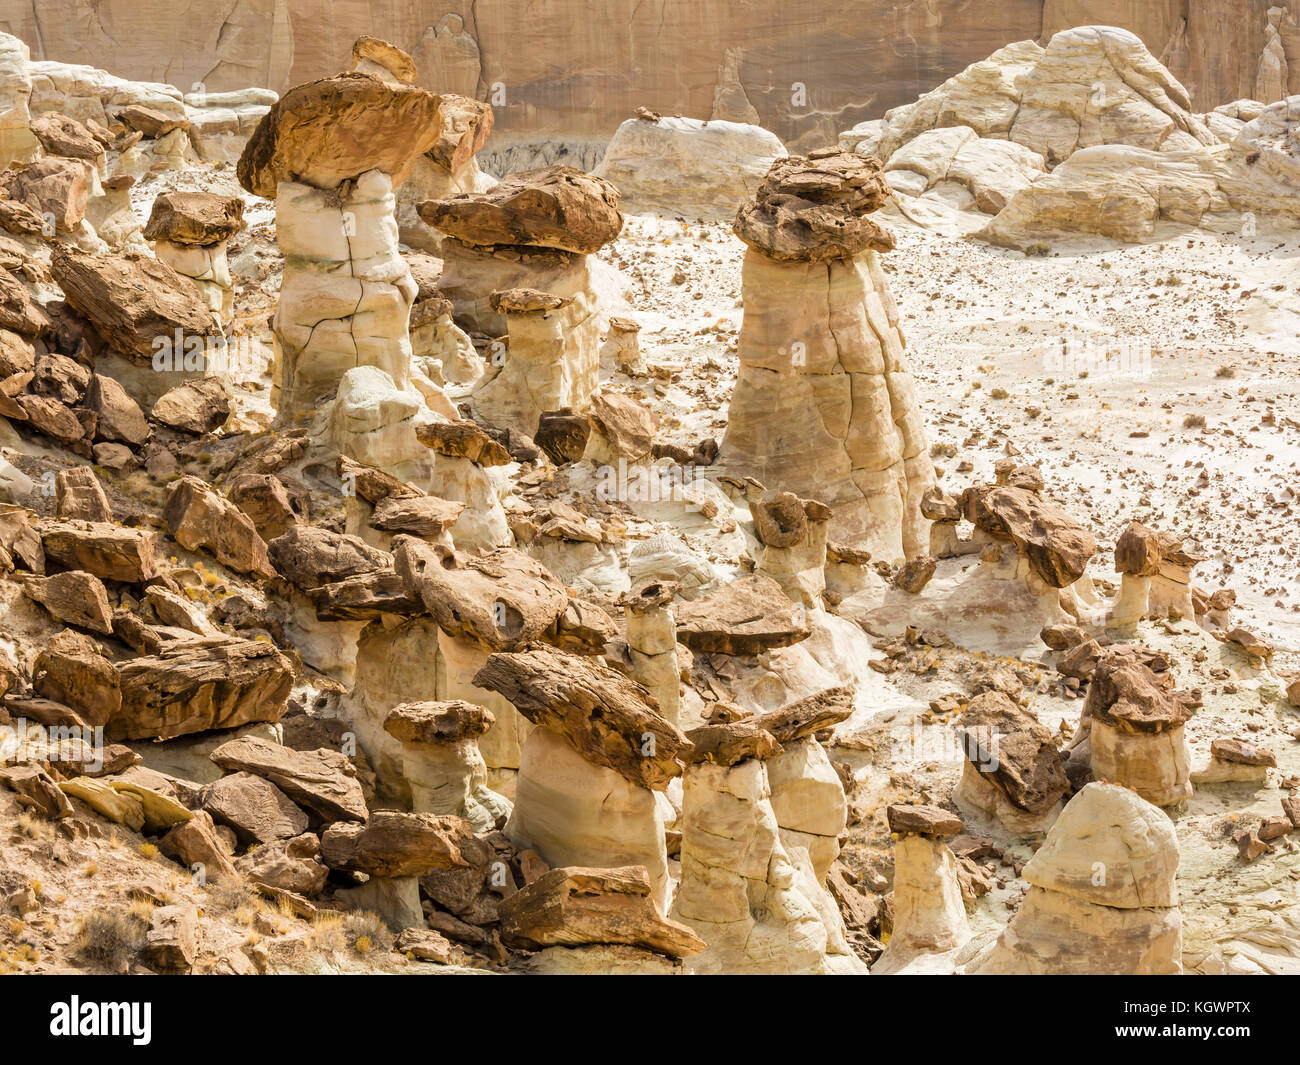 Brown and white layers of Entrada sandstone mix and create strange hoodoos at the Rimrocks area of Grand Staircase Escalante National Monument, Utah. Stock Photo